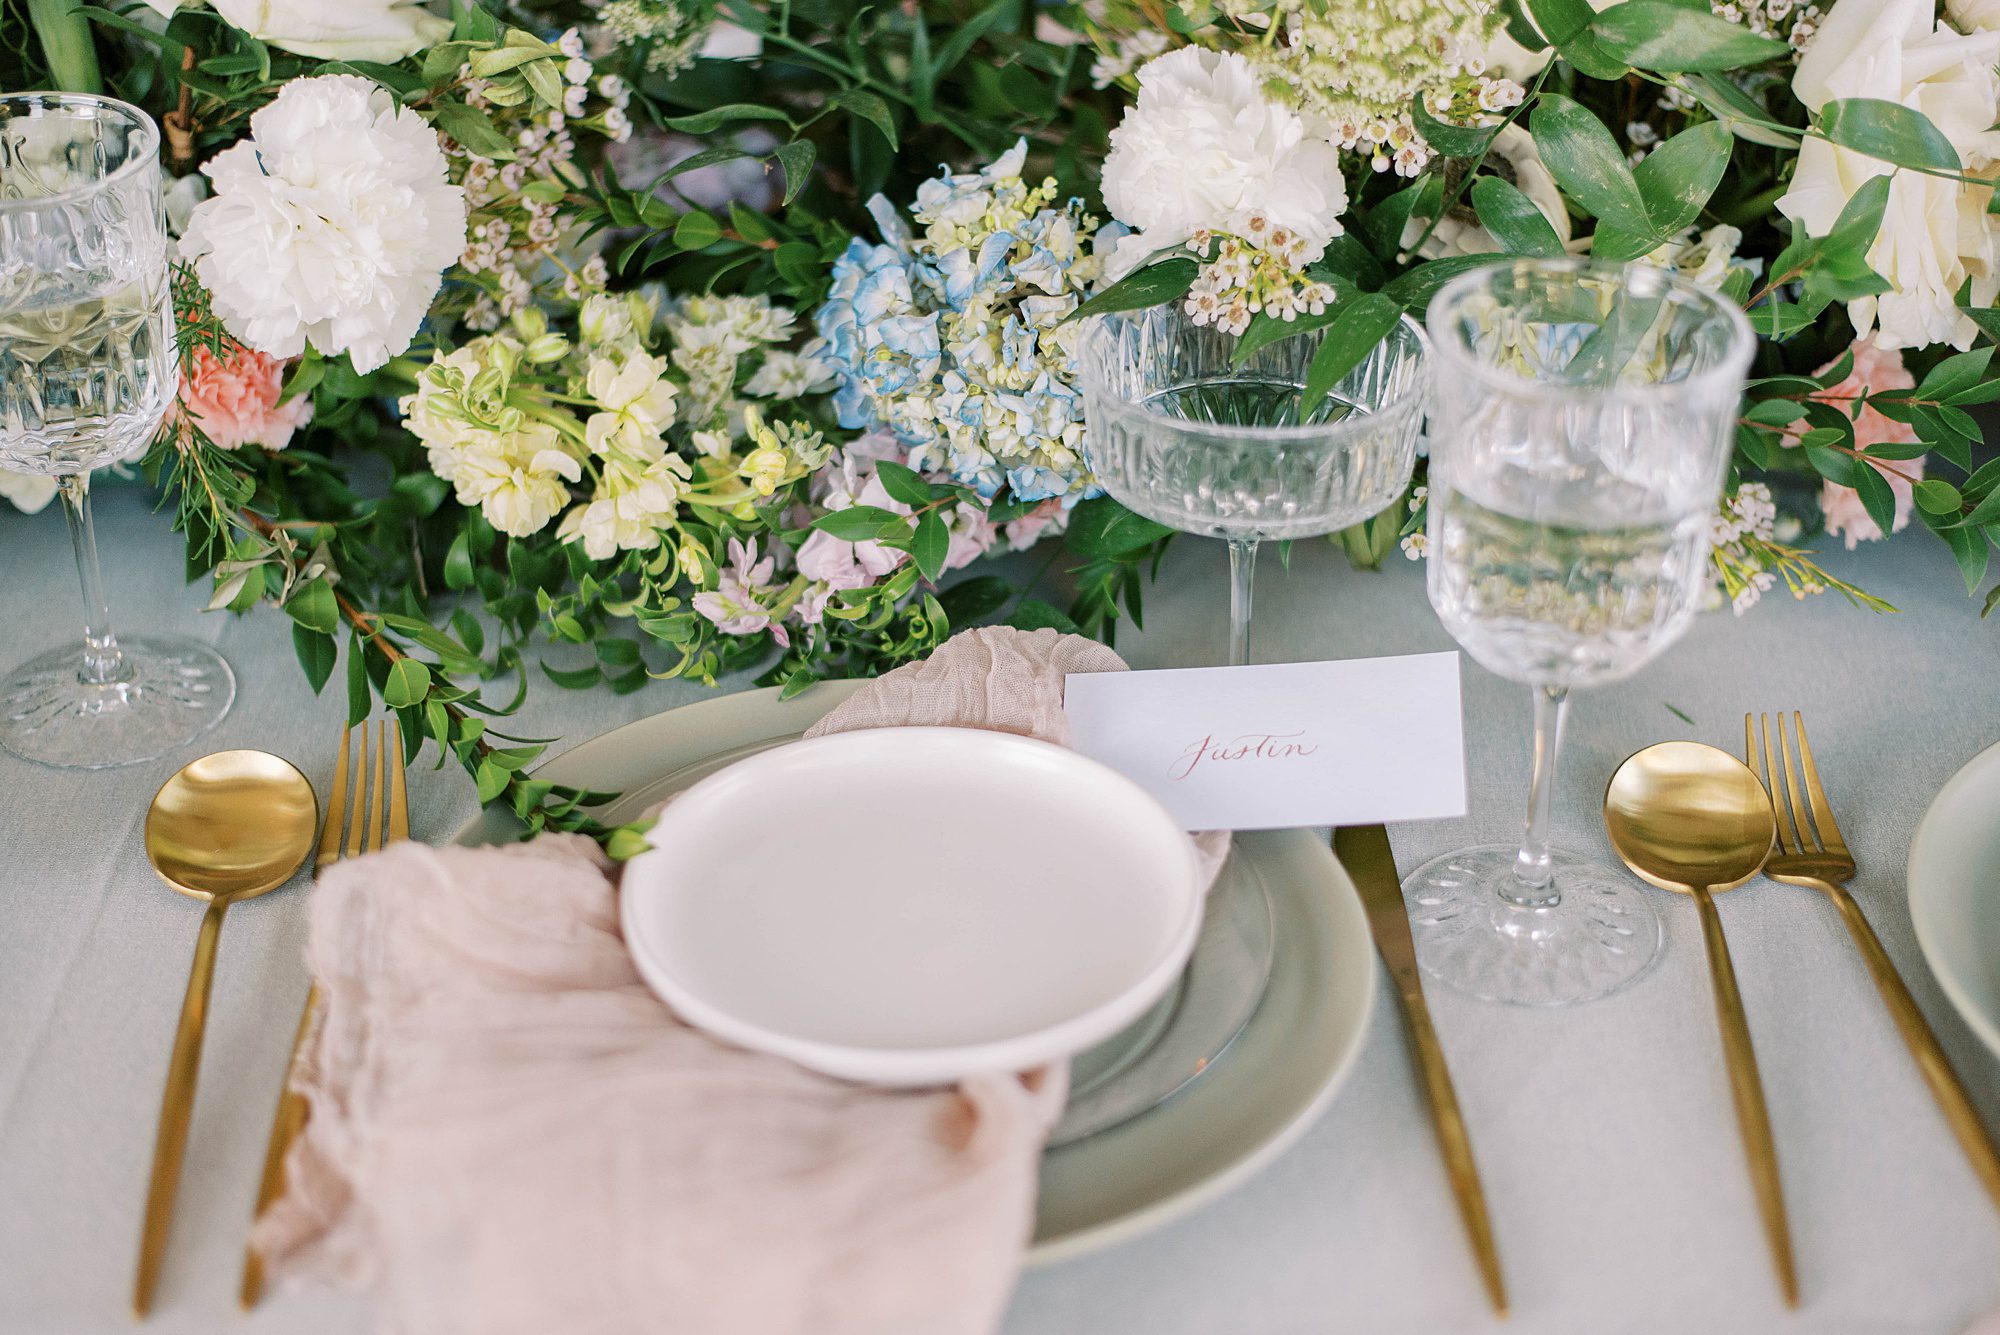 place setting with white plate, blush napkin, and floral centerpieces